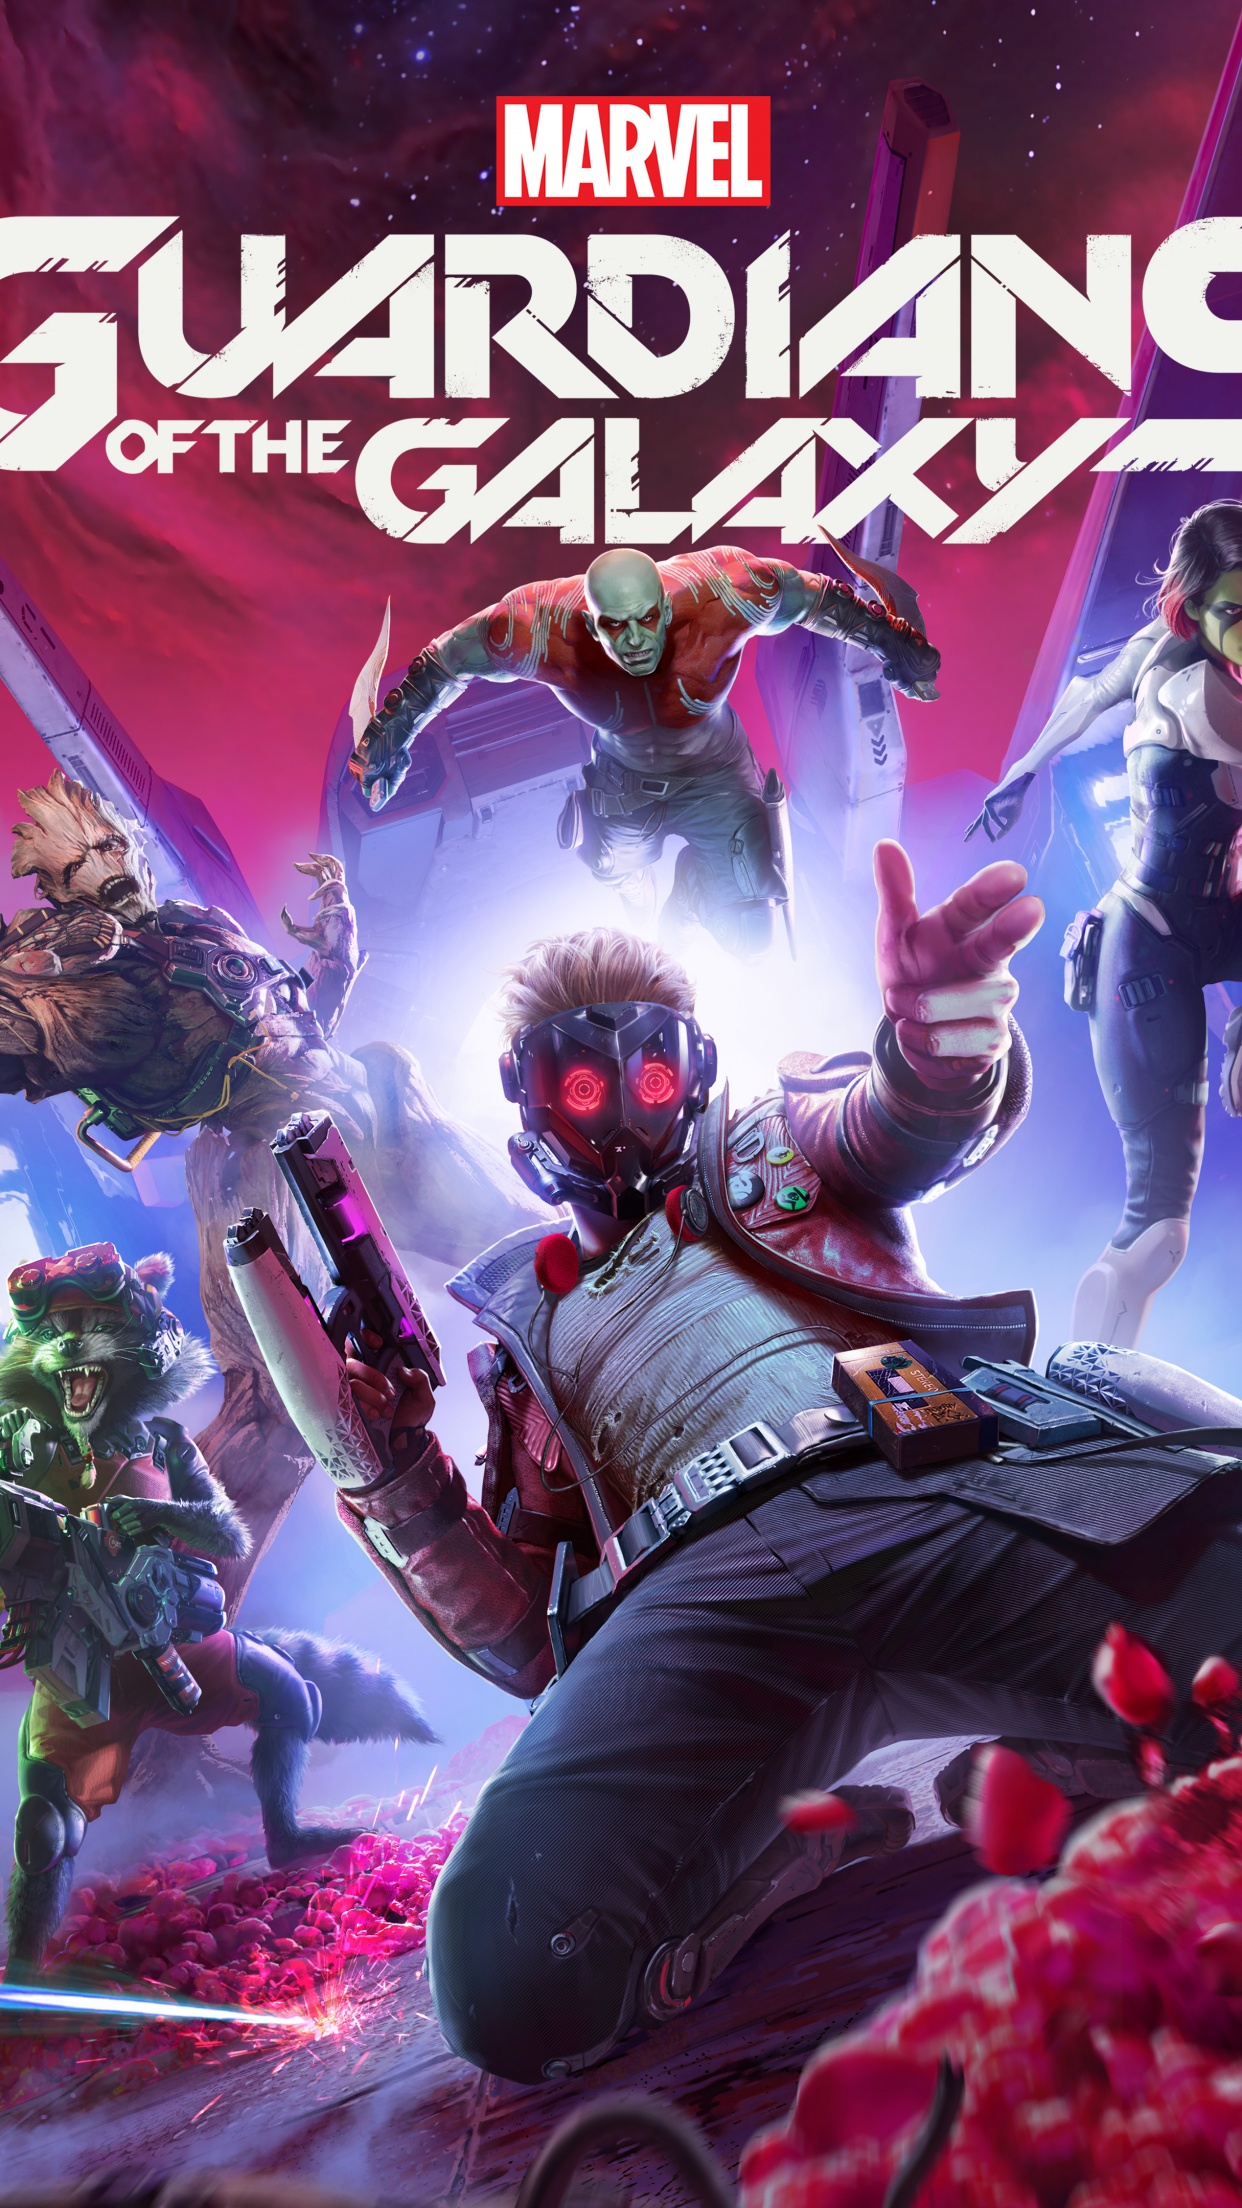 Marvel's Guardians of the Galaxy Wallpaper 4K, E3 2021, 2022 Games